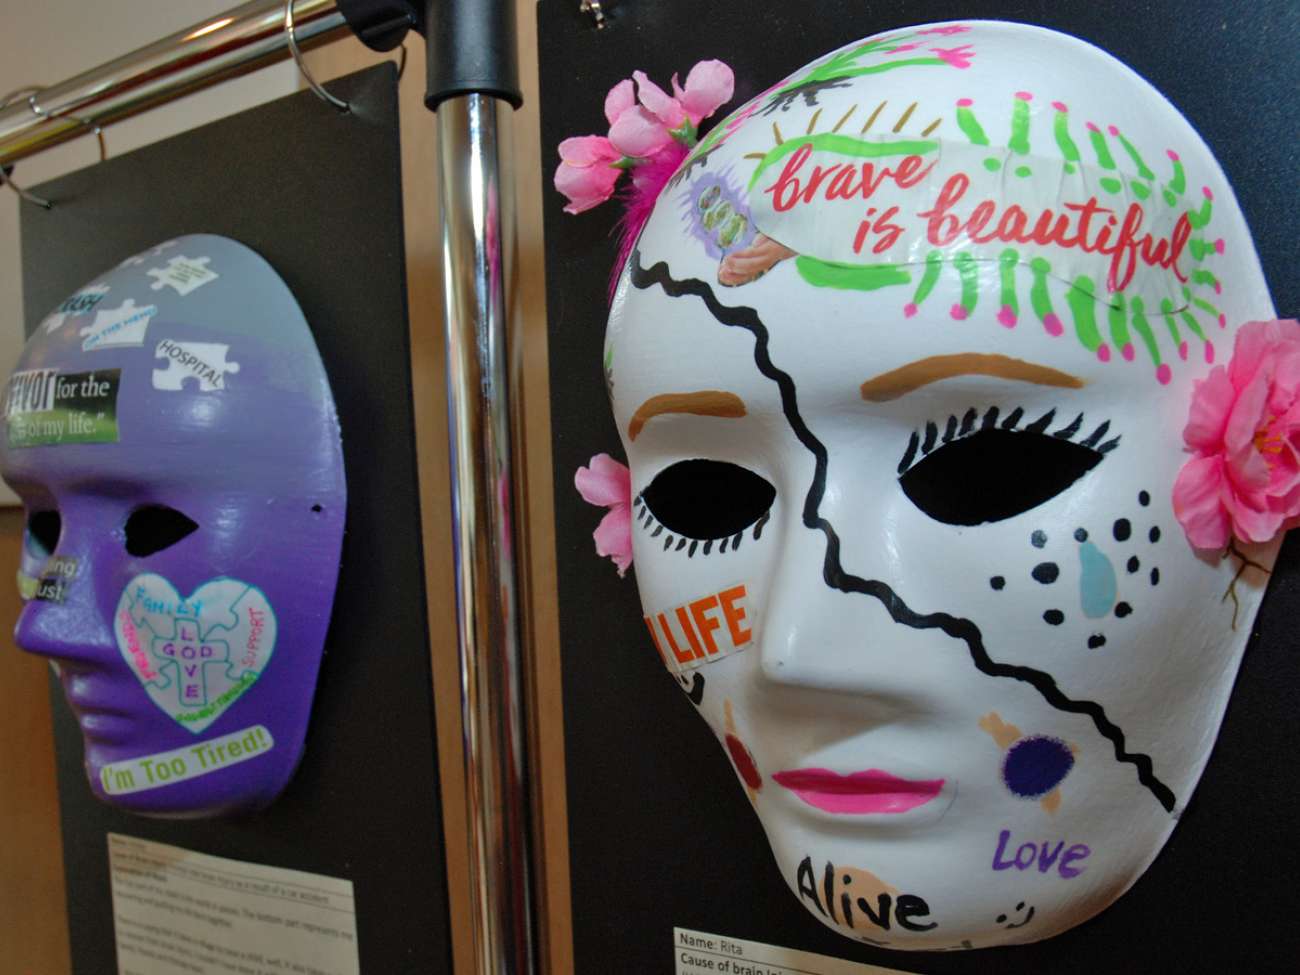 The masks will be on display until June 10th, and move on to other locations in Waterloo Wellington.